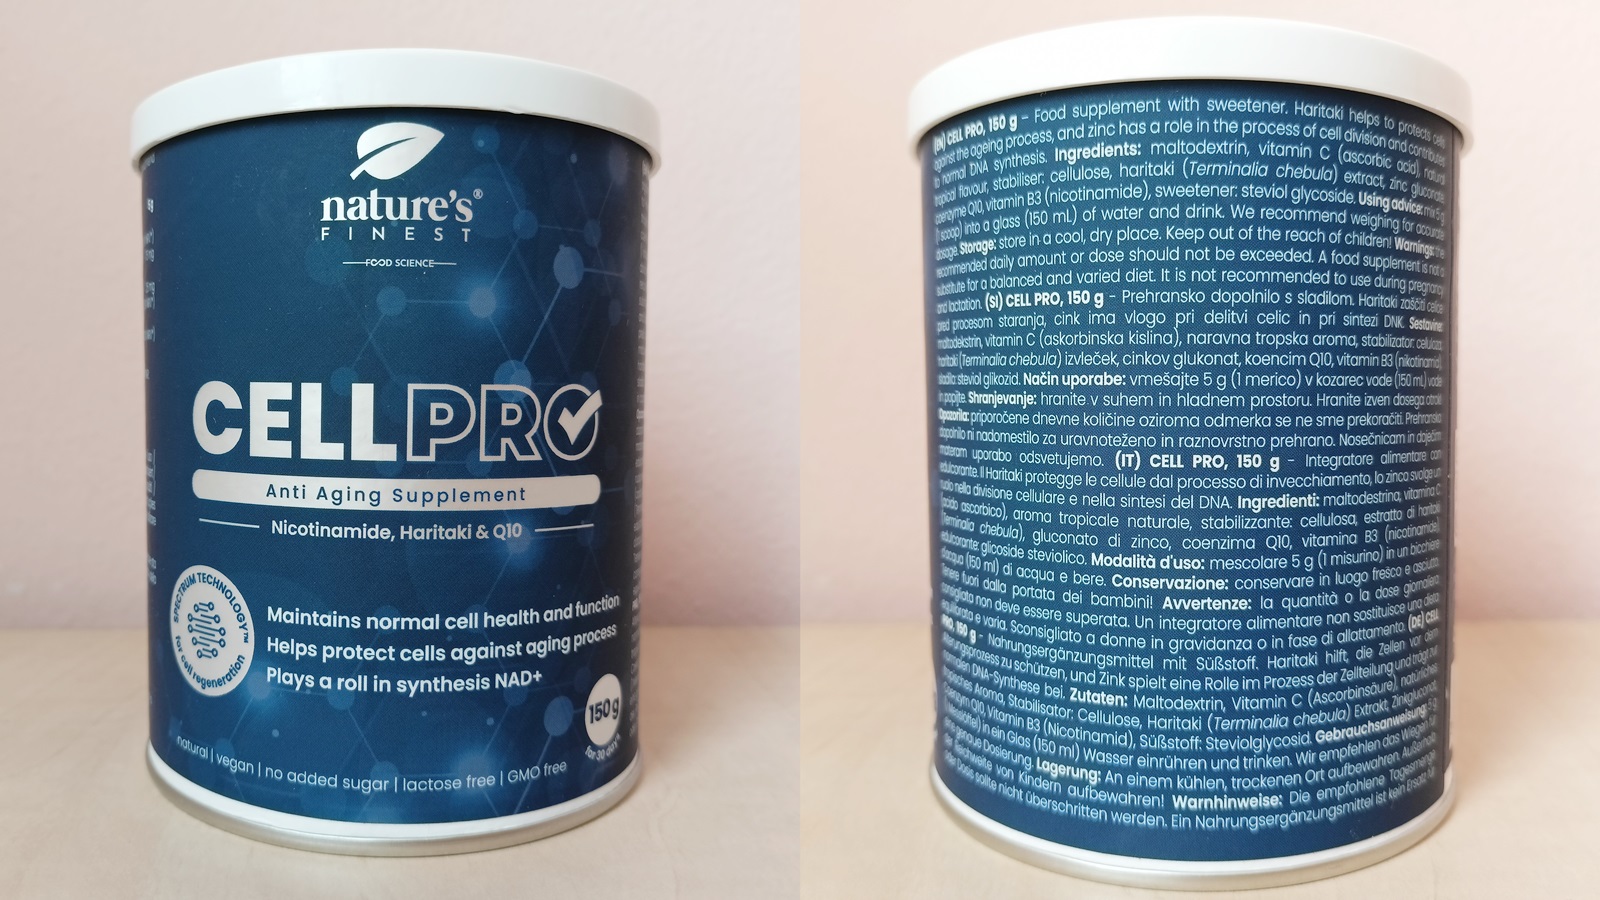 Recenze: Cell Pro od Nature’s Finest